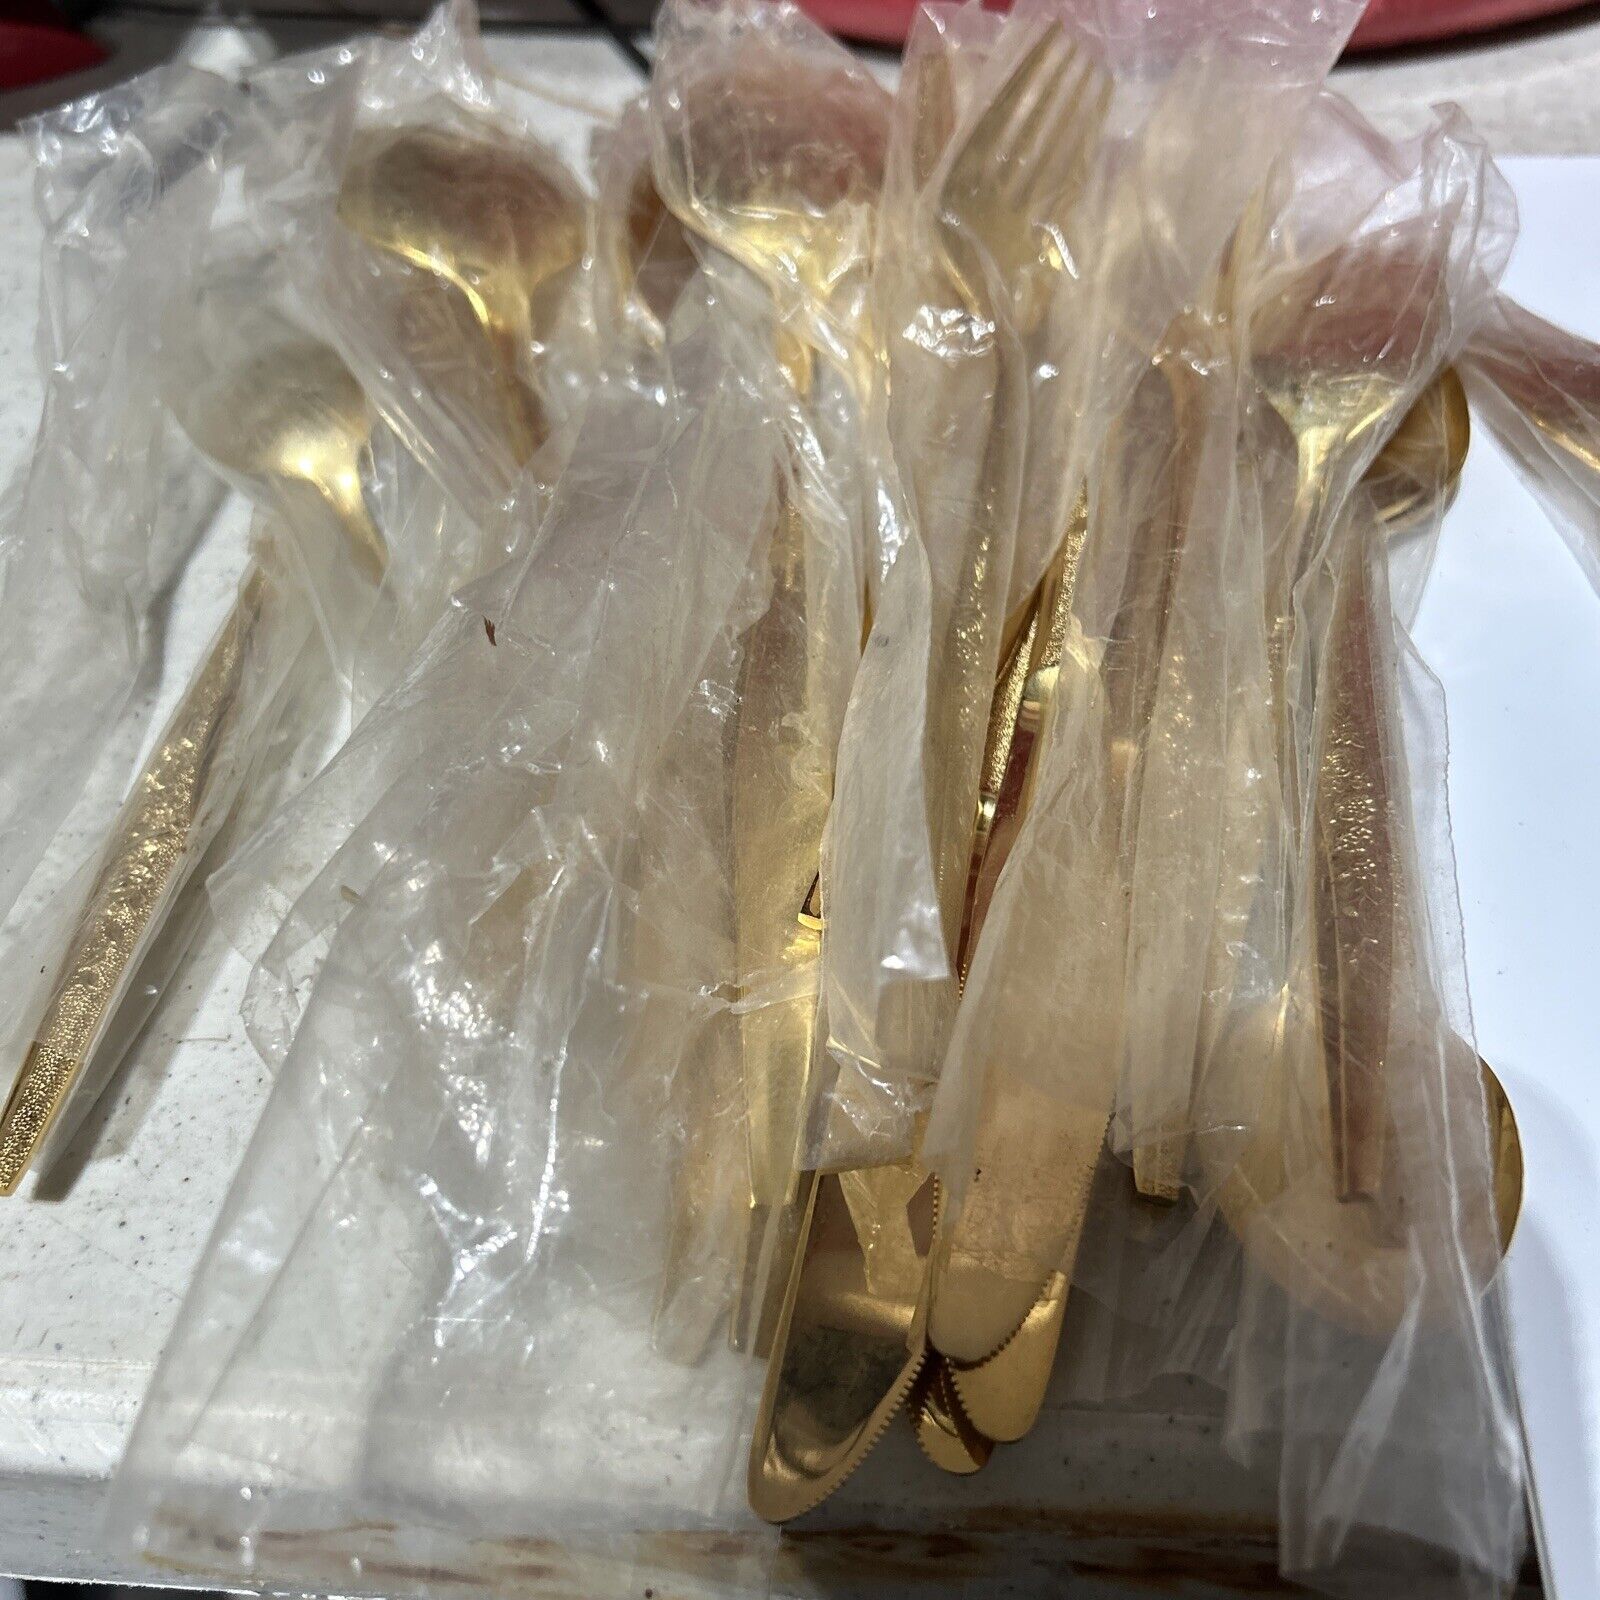 Lot of 30 Pieces of GOLDEN BOUQUET Gold-Plated Color Flatware Forks Spoons Etc.